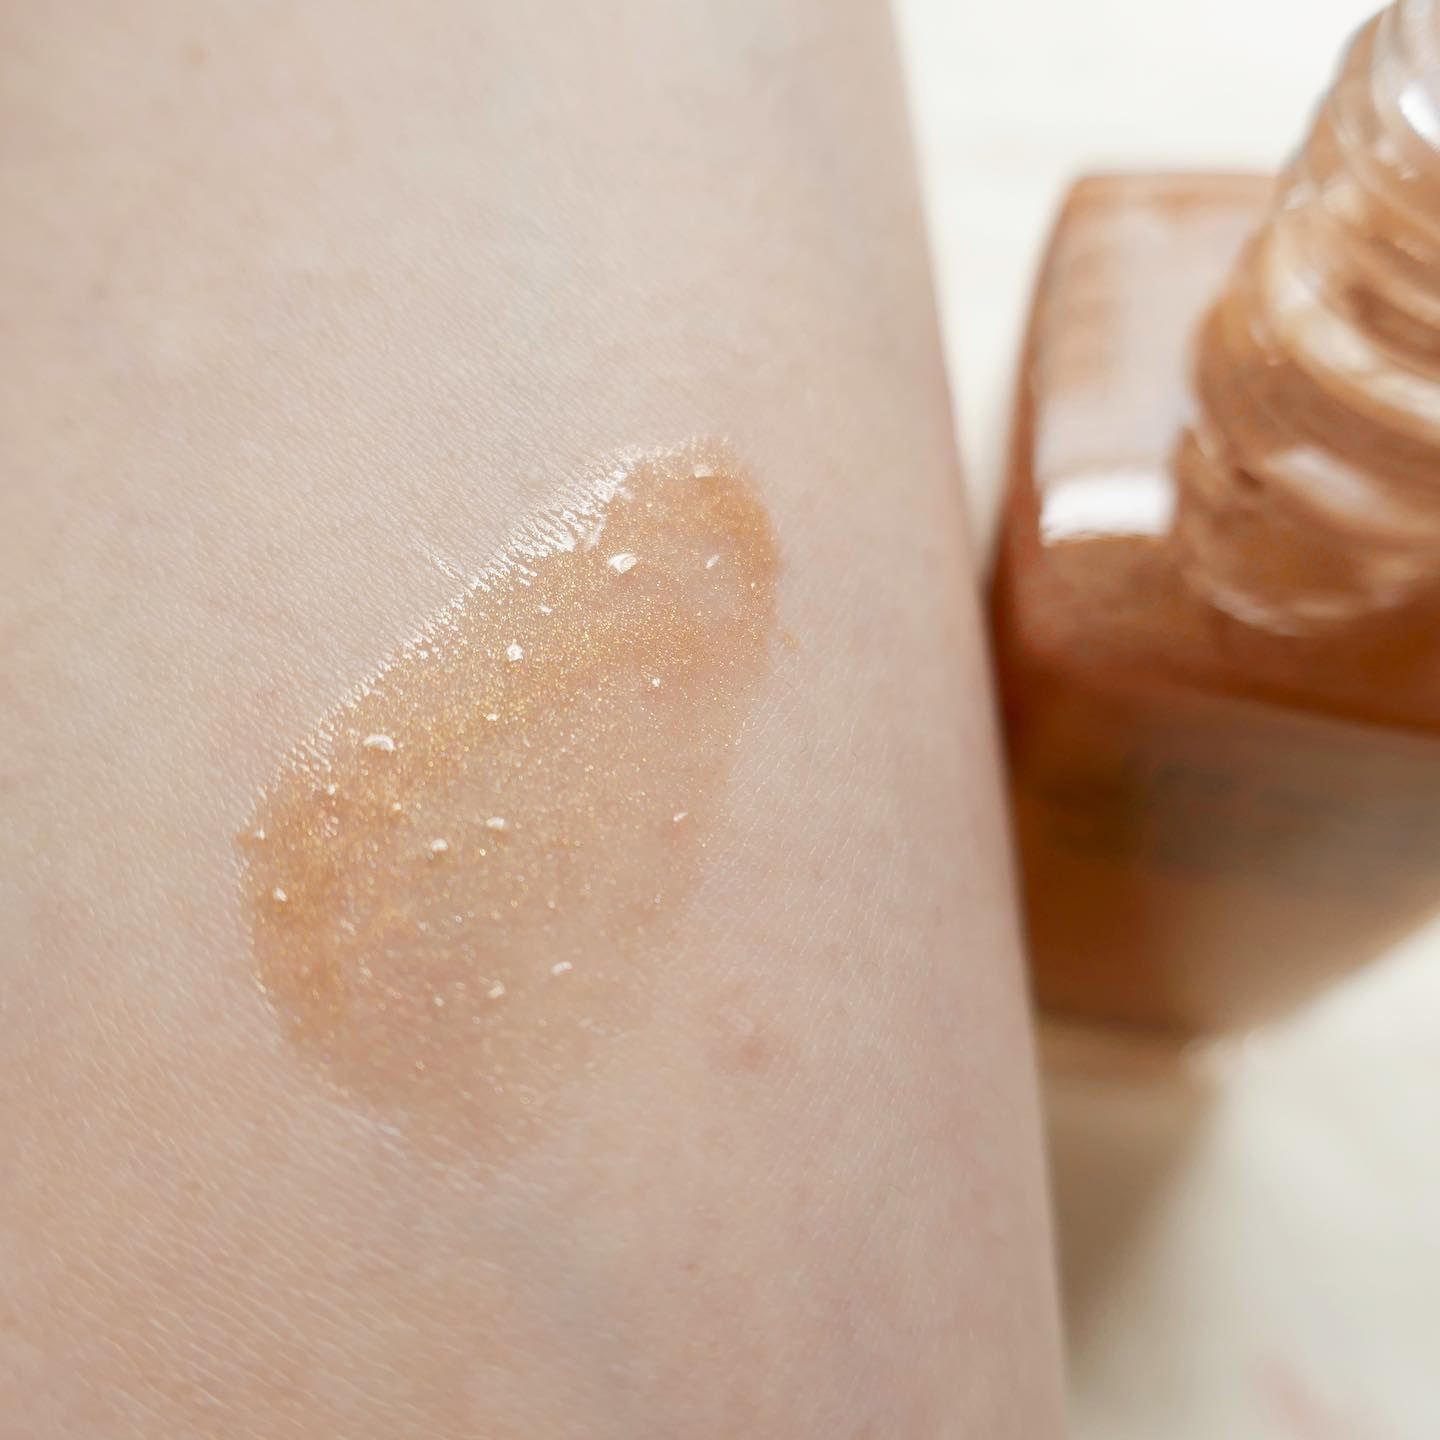 Chanel Les Beiges Healthy Glow Illuminating Oil Summer 2023 - Swatches